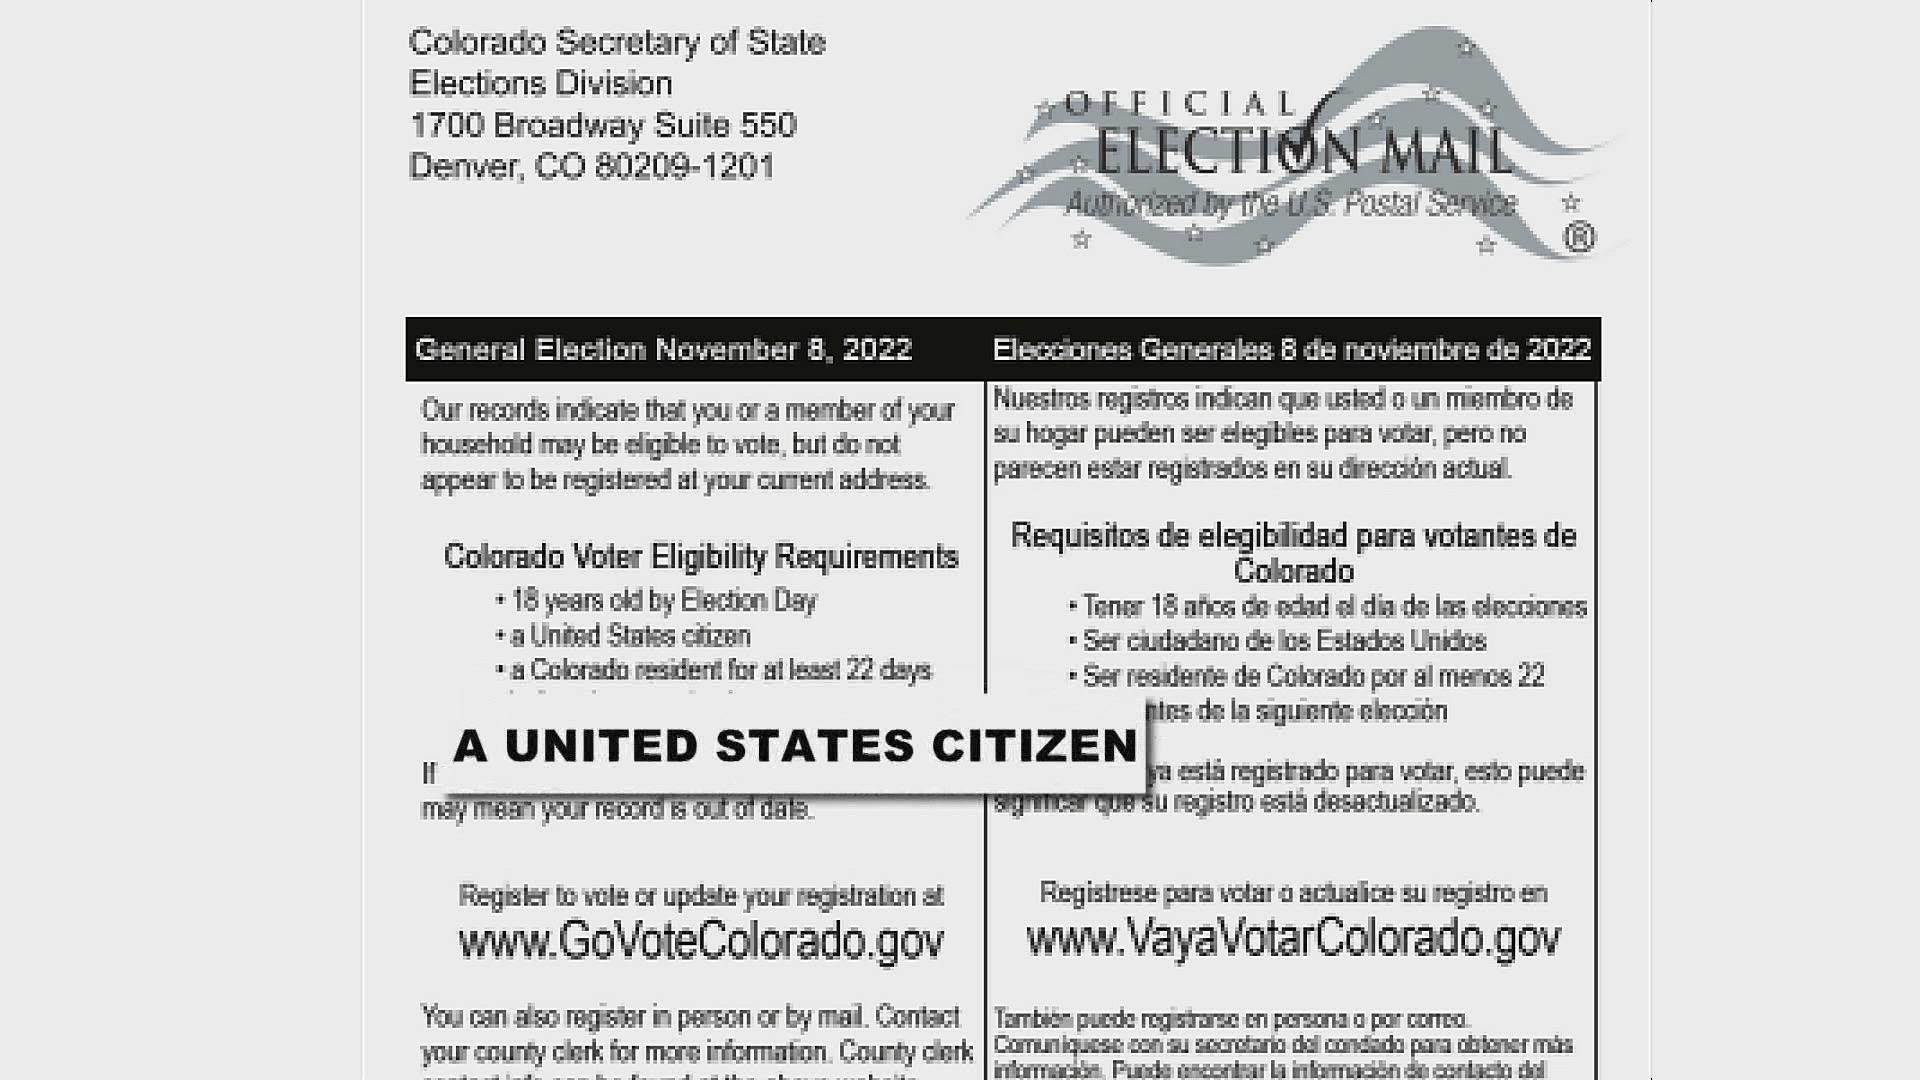 Colorado’s secretary of state’s office says it mistakenly sent postcards to noncitizens encouraging them to register to vote due to a database glitch.